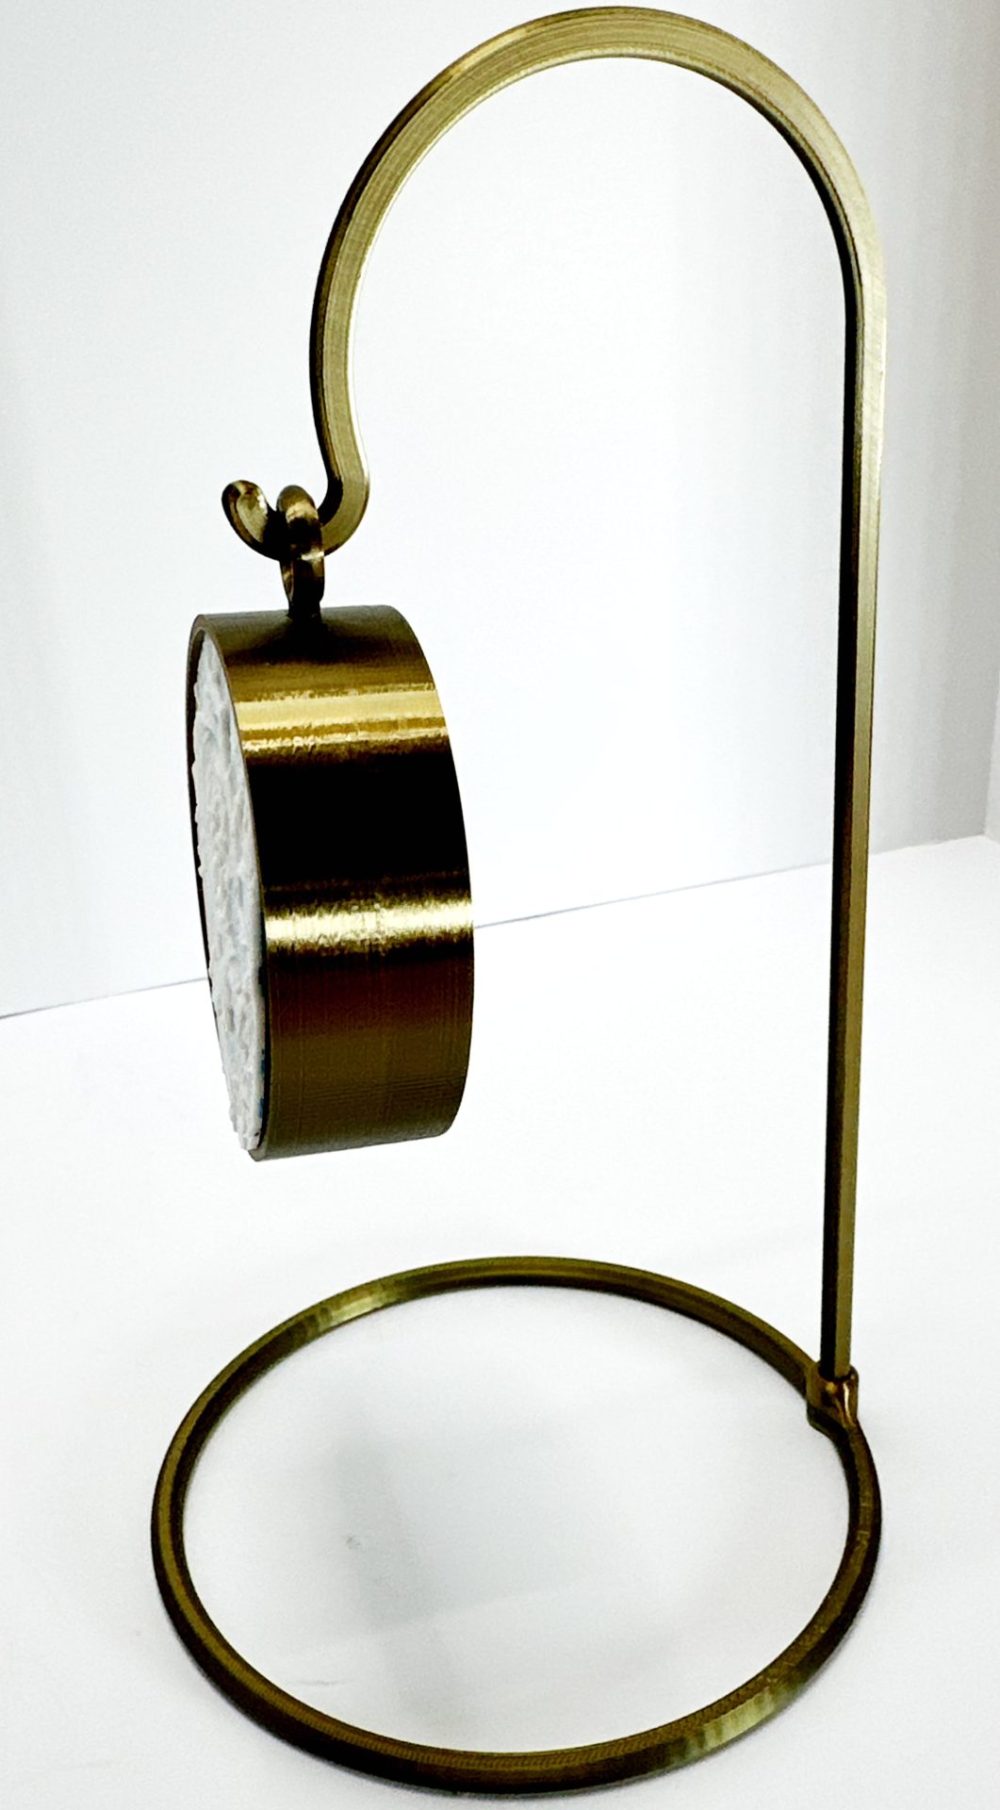 Gold-colored stand display for hanging ornaments, shown empty on the 3D Funny Christmas Ornament Penguin product page.